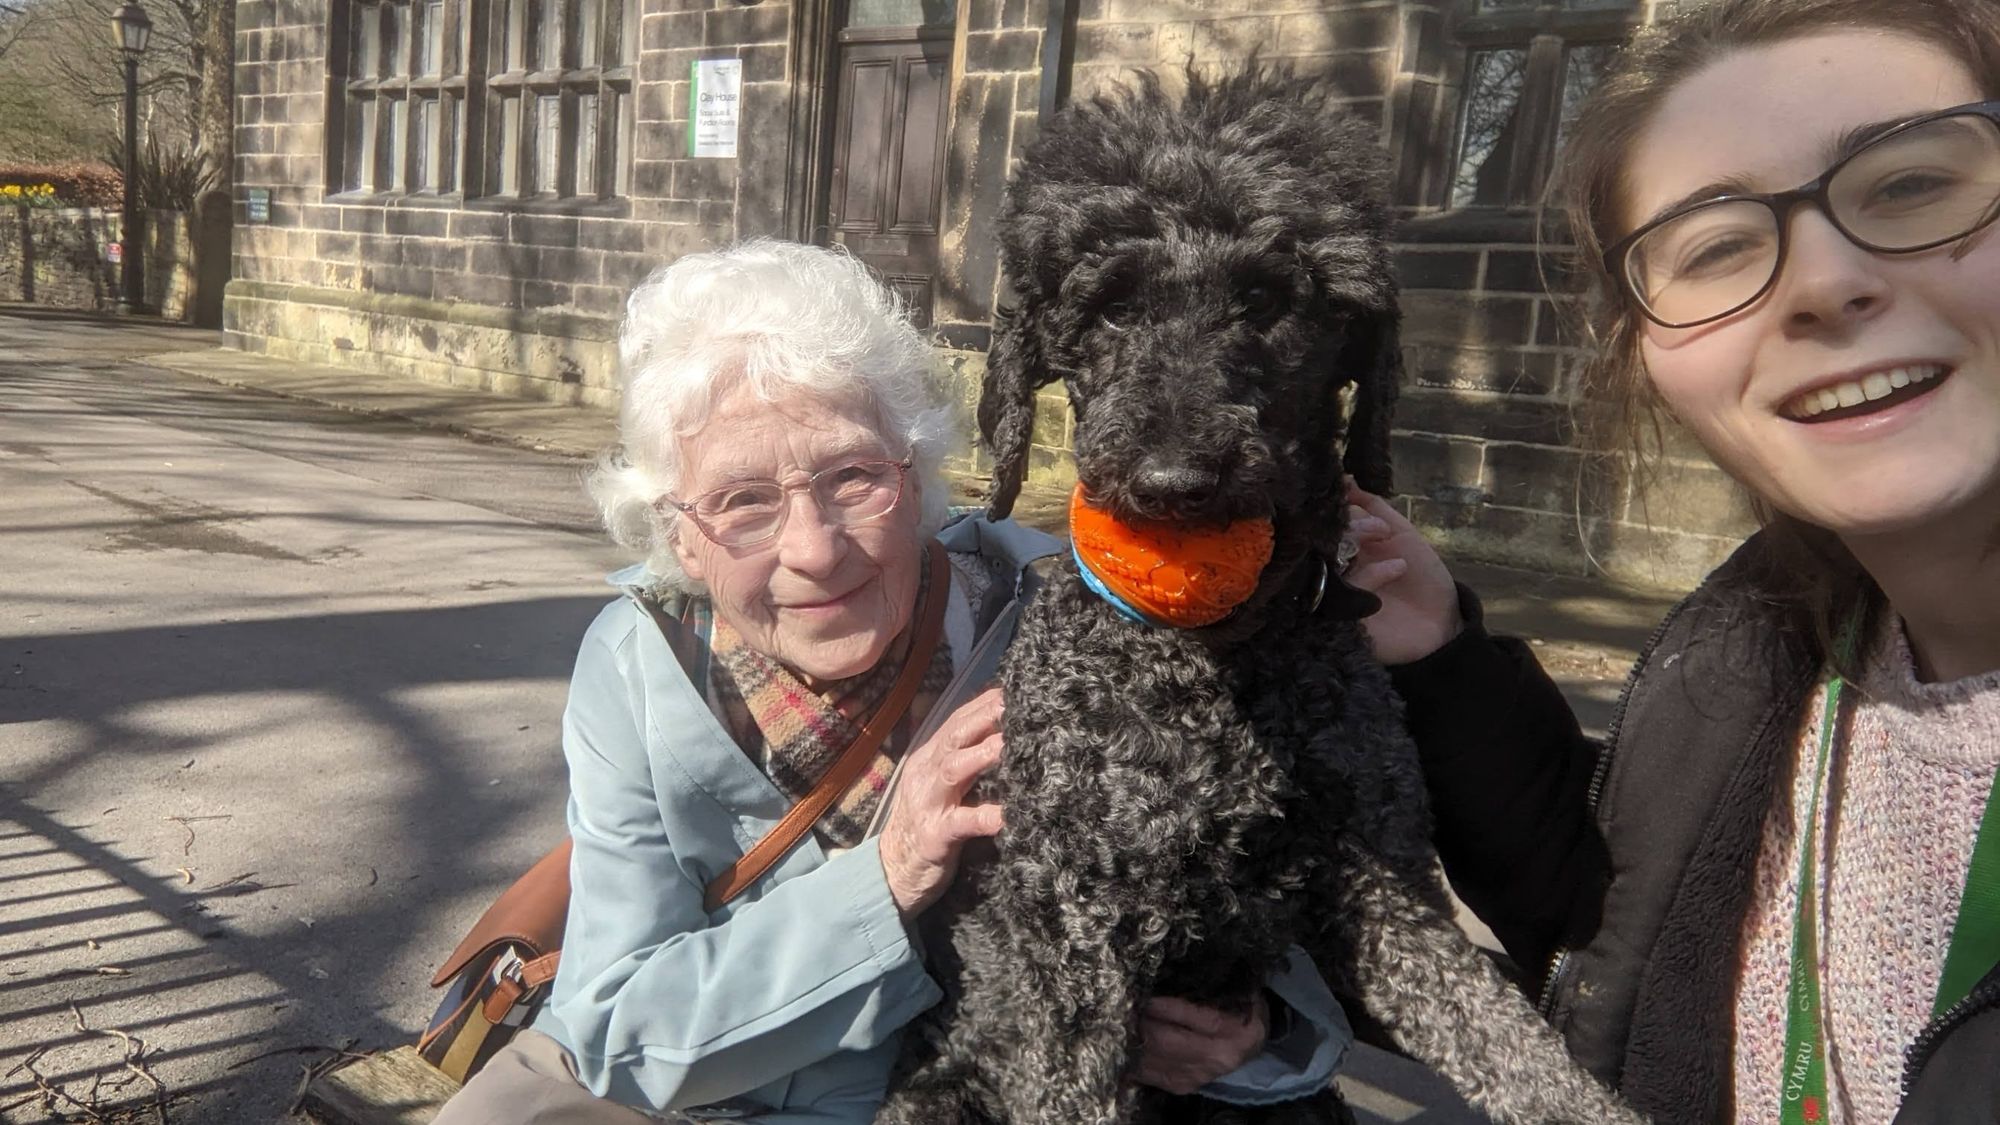 A photo showing Iris and Molly surrounding a poodle named Dora, who is holding an orange ball in her mouth